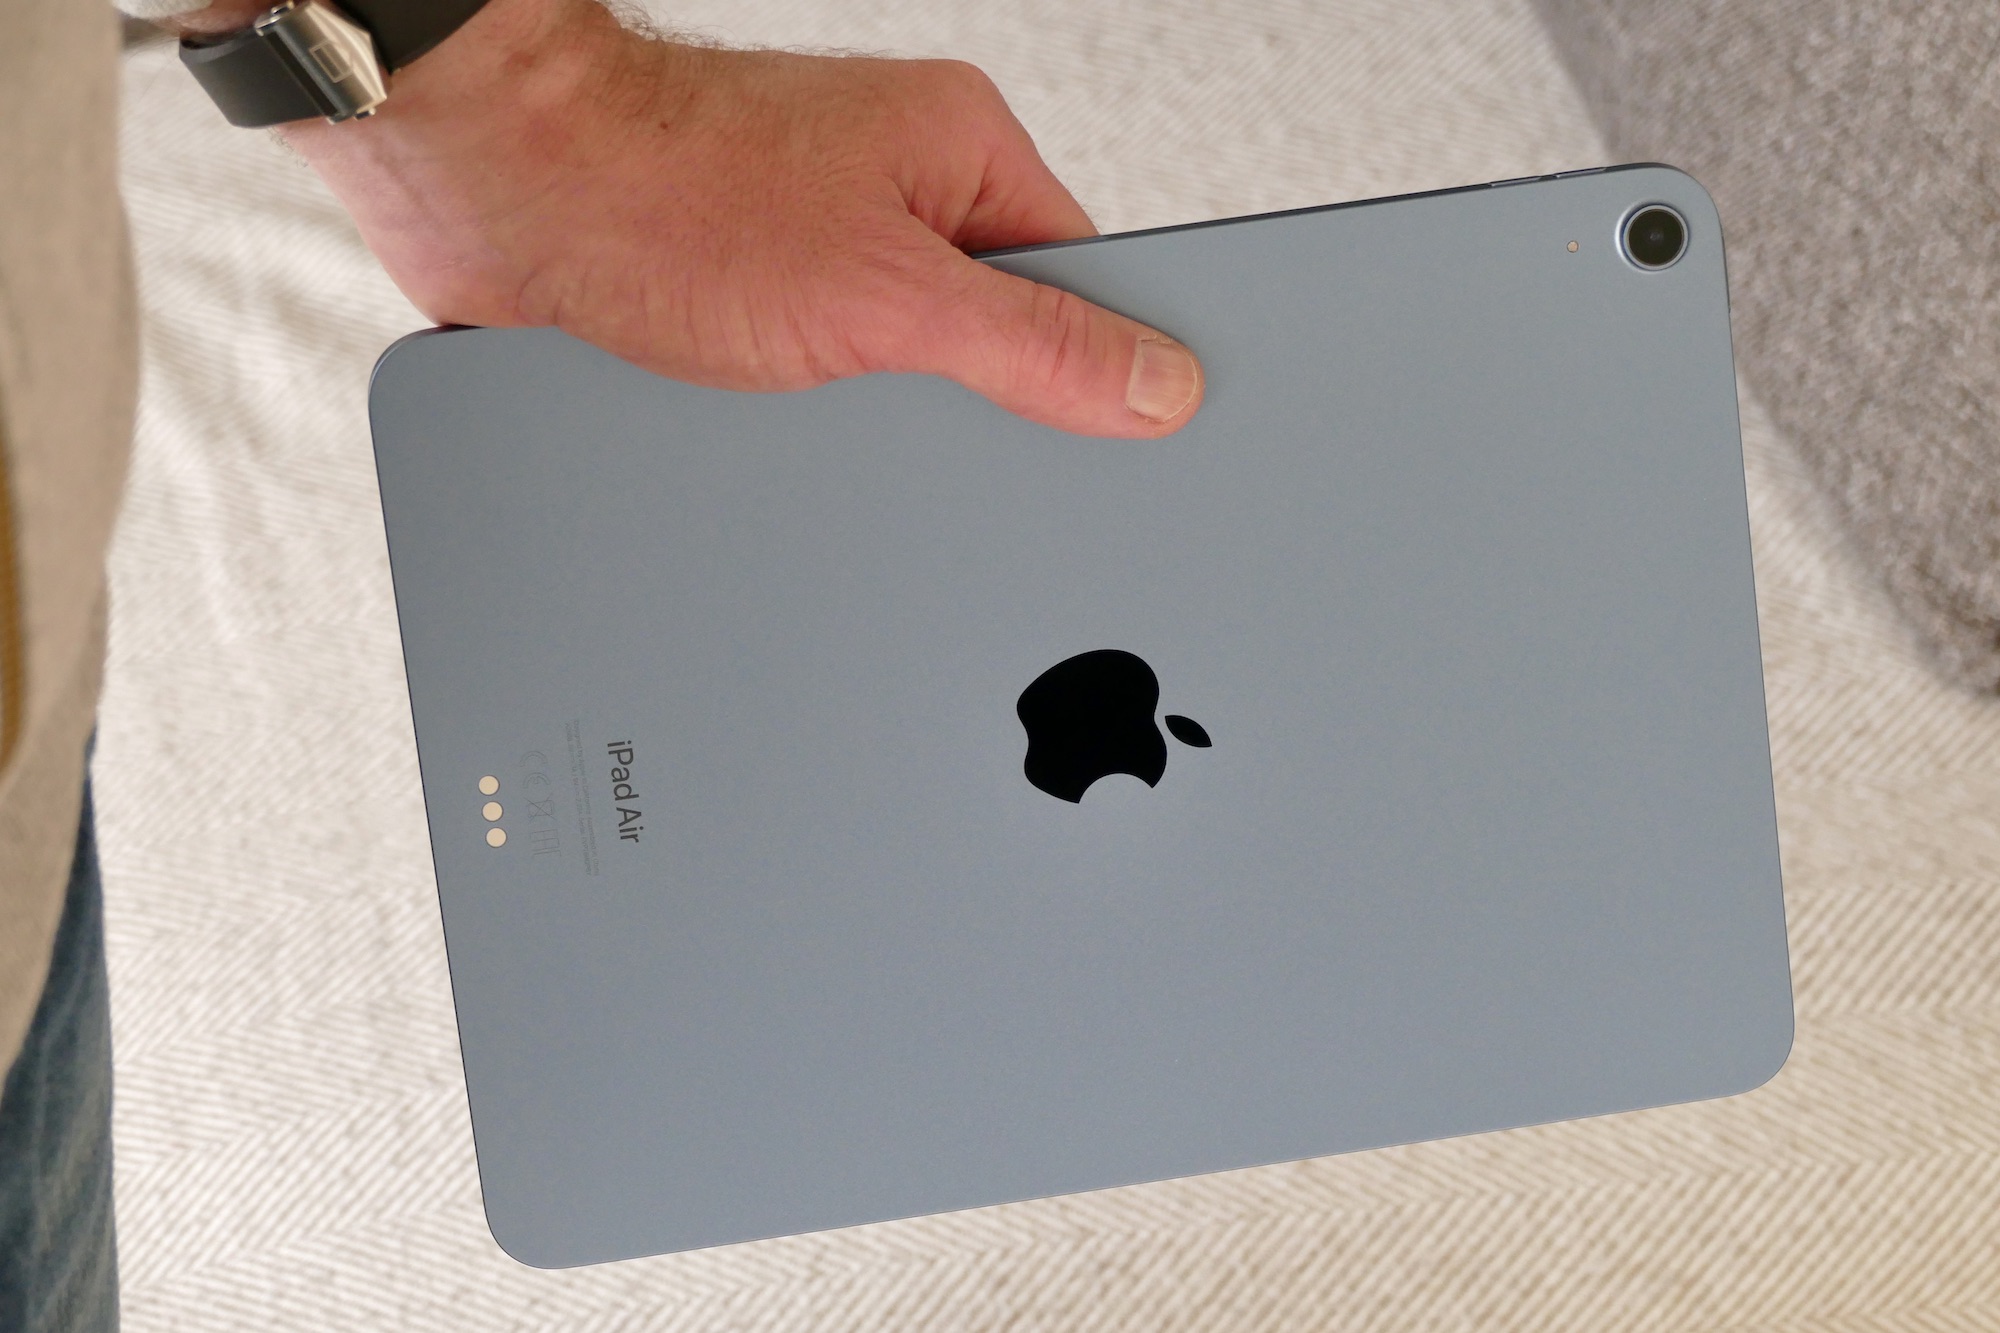 Apple iPad Air (5th Gen) review: the best iPad for most people